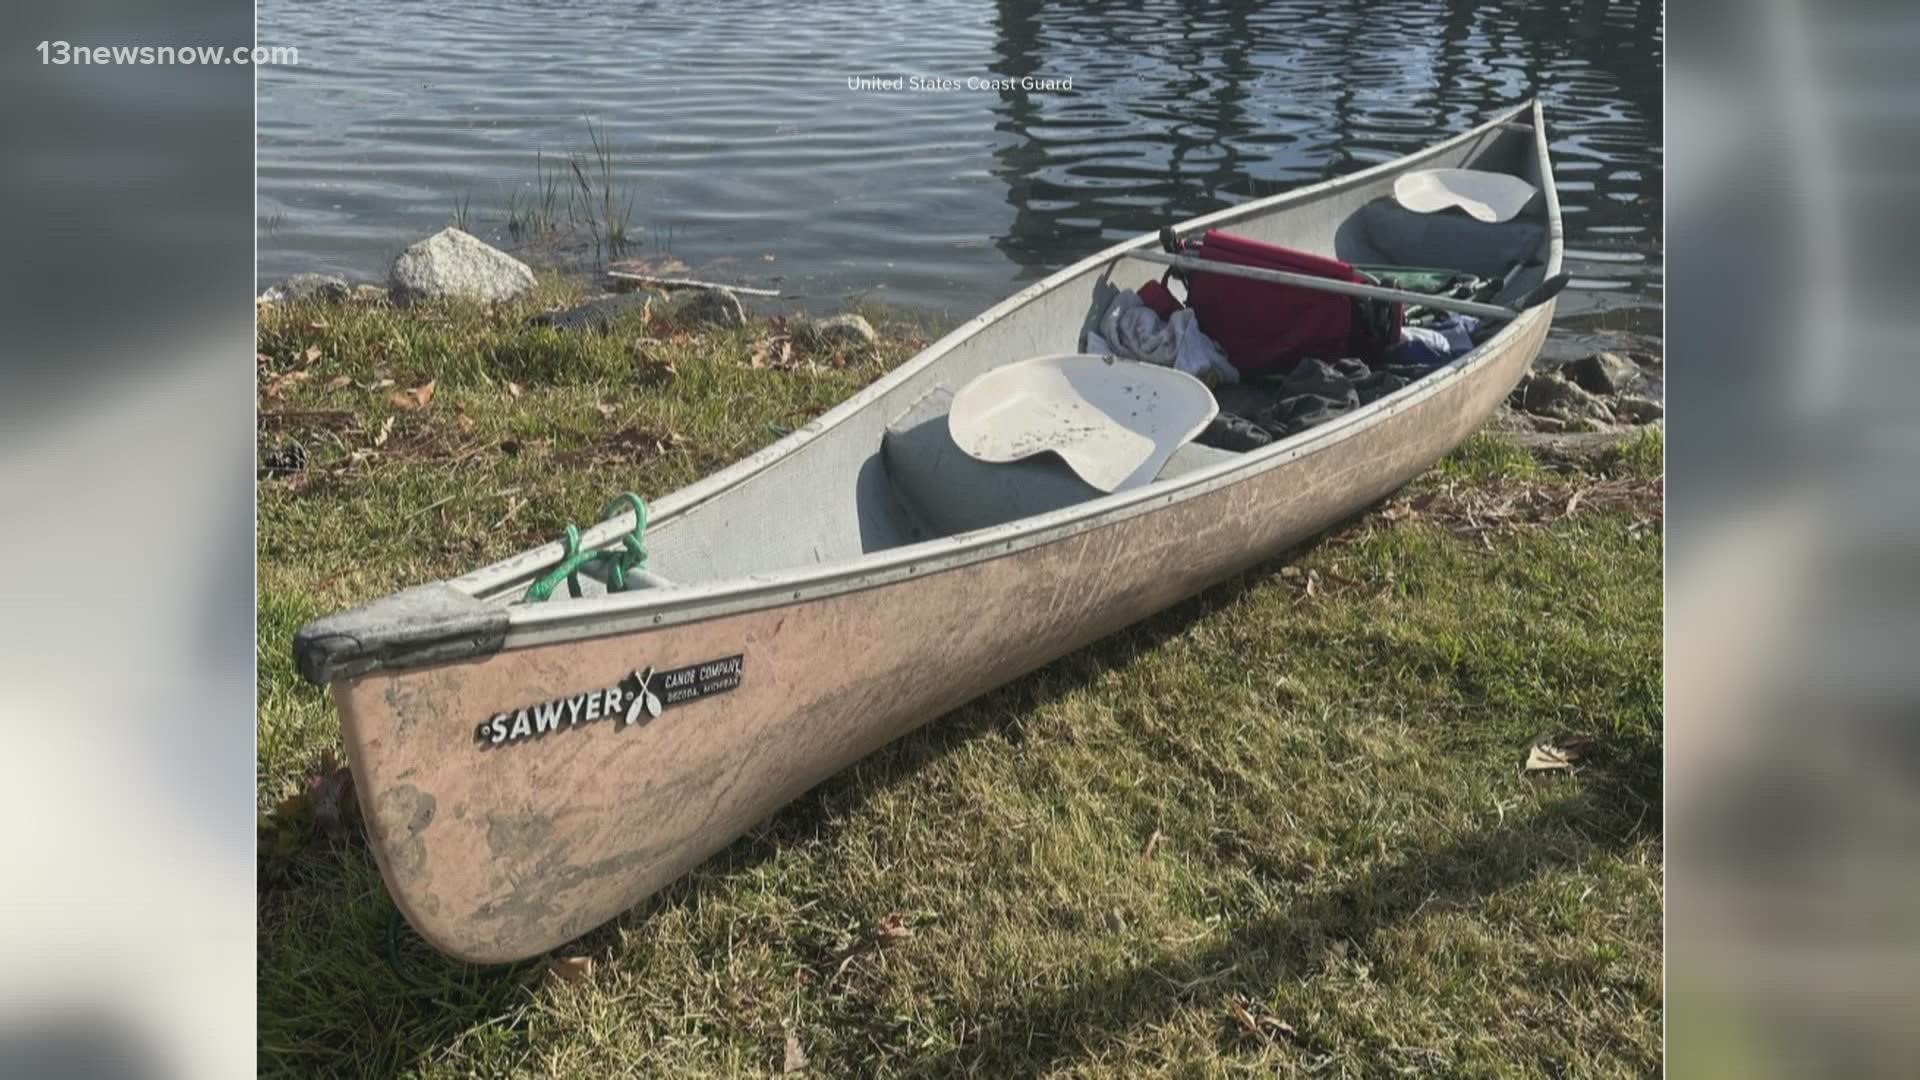 The canoe was found along the eastern branch of the Elizabeth River.